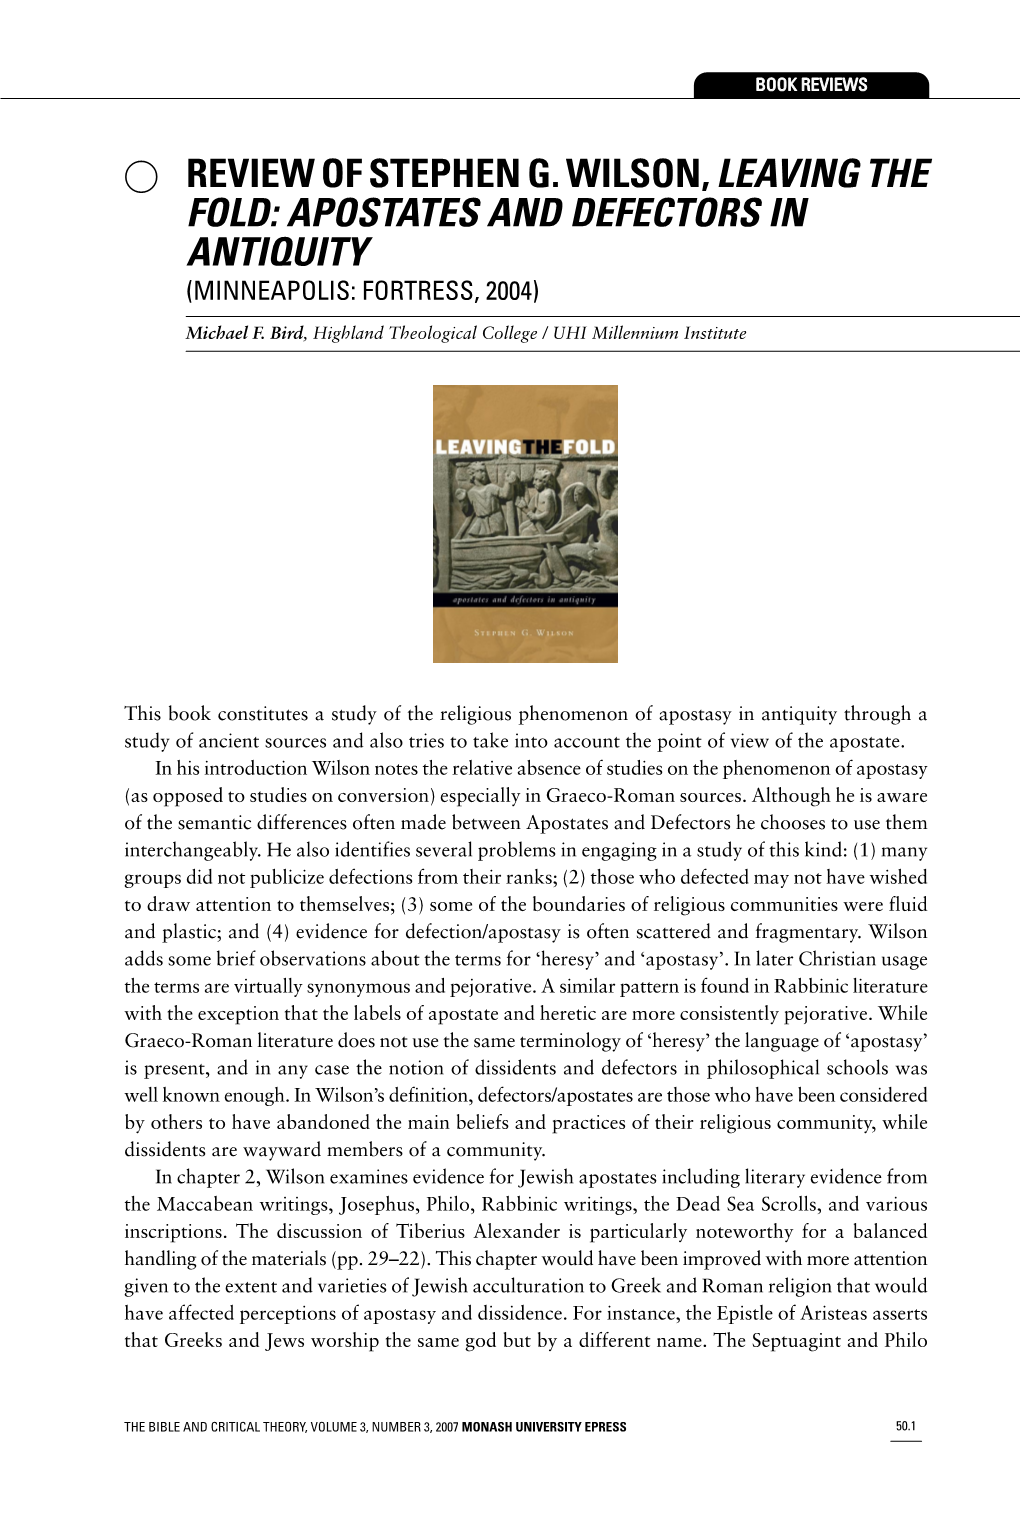 Apostates and Defectors in Antiquity (Minneapolis: Fortress, 2004)